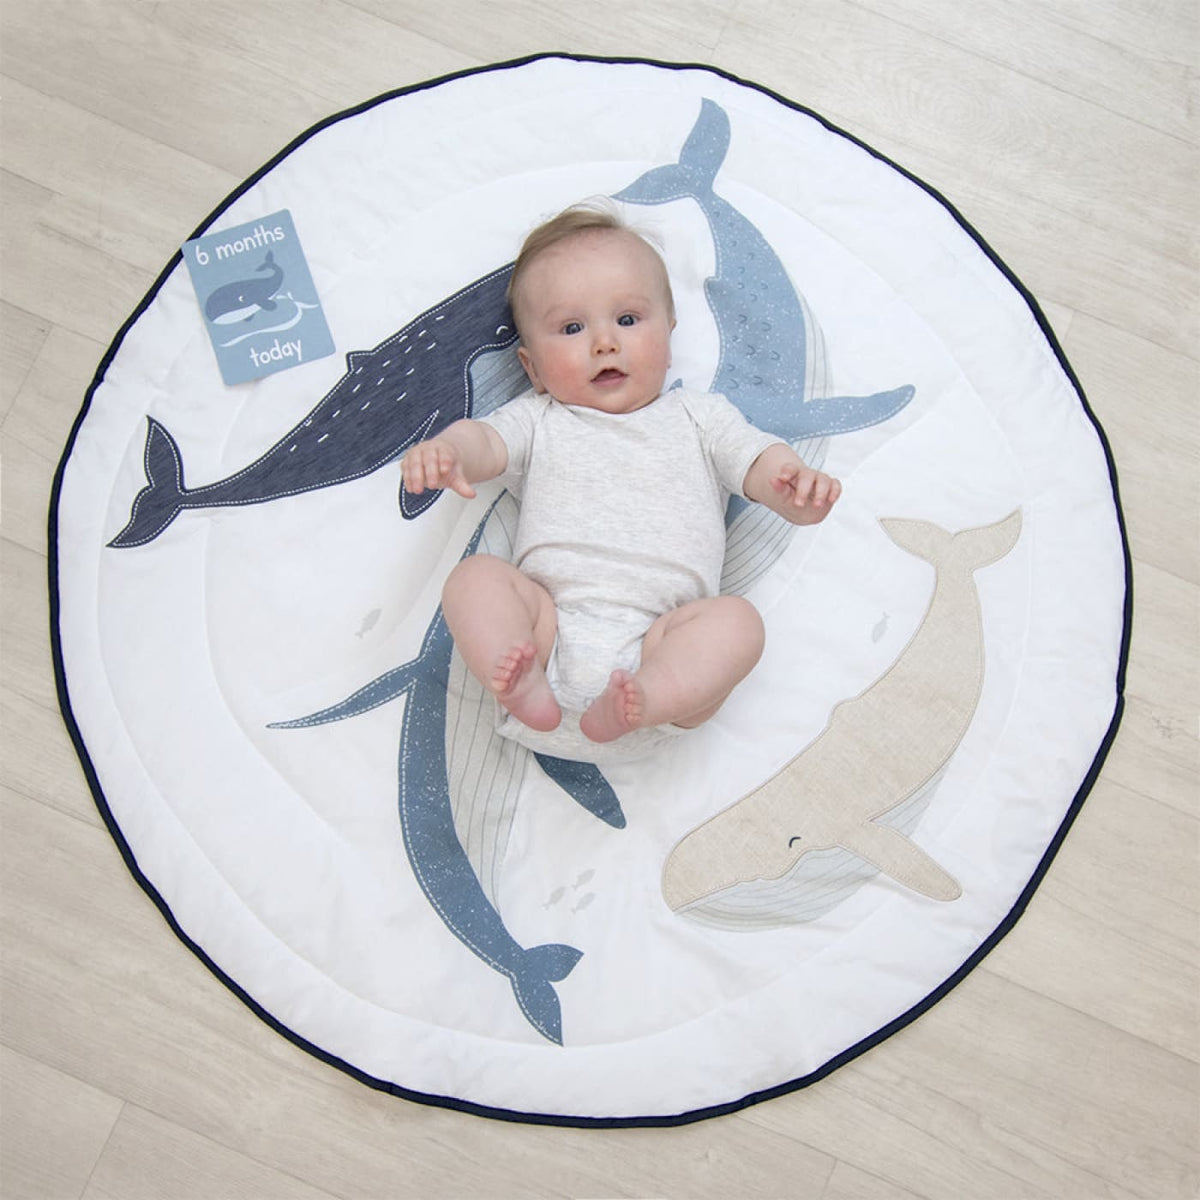 Lolli Living Round play mat with Milestone card - Oceania - Oceania - TOYS &amp; PLAY - PLAY MATS/GYMS